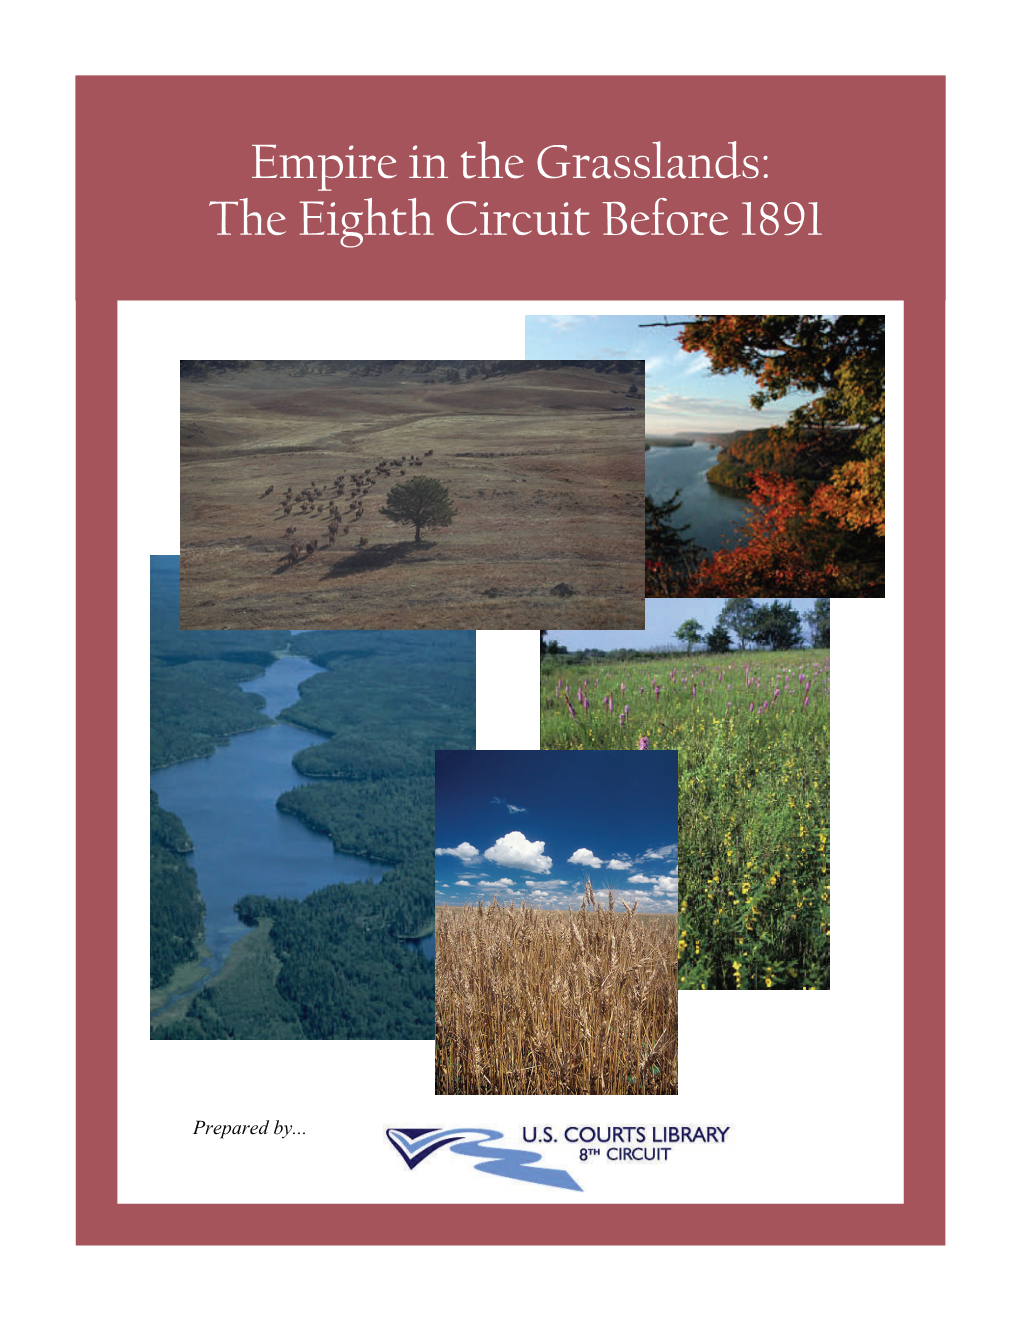 Empire in the Grasslands: the Eighth Circuit Before 1891